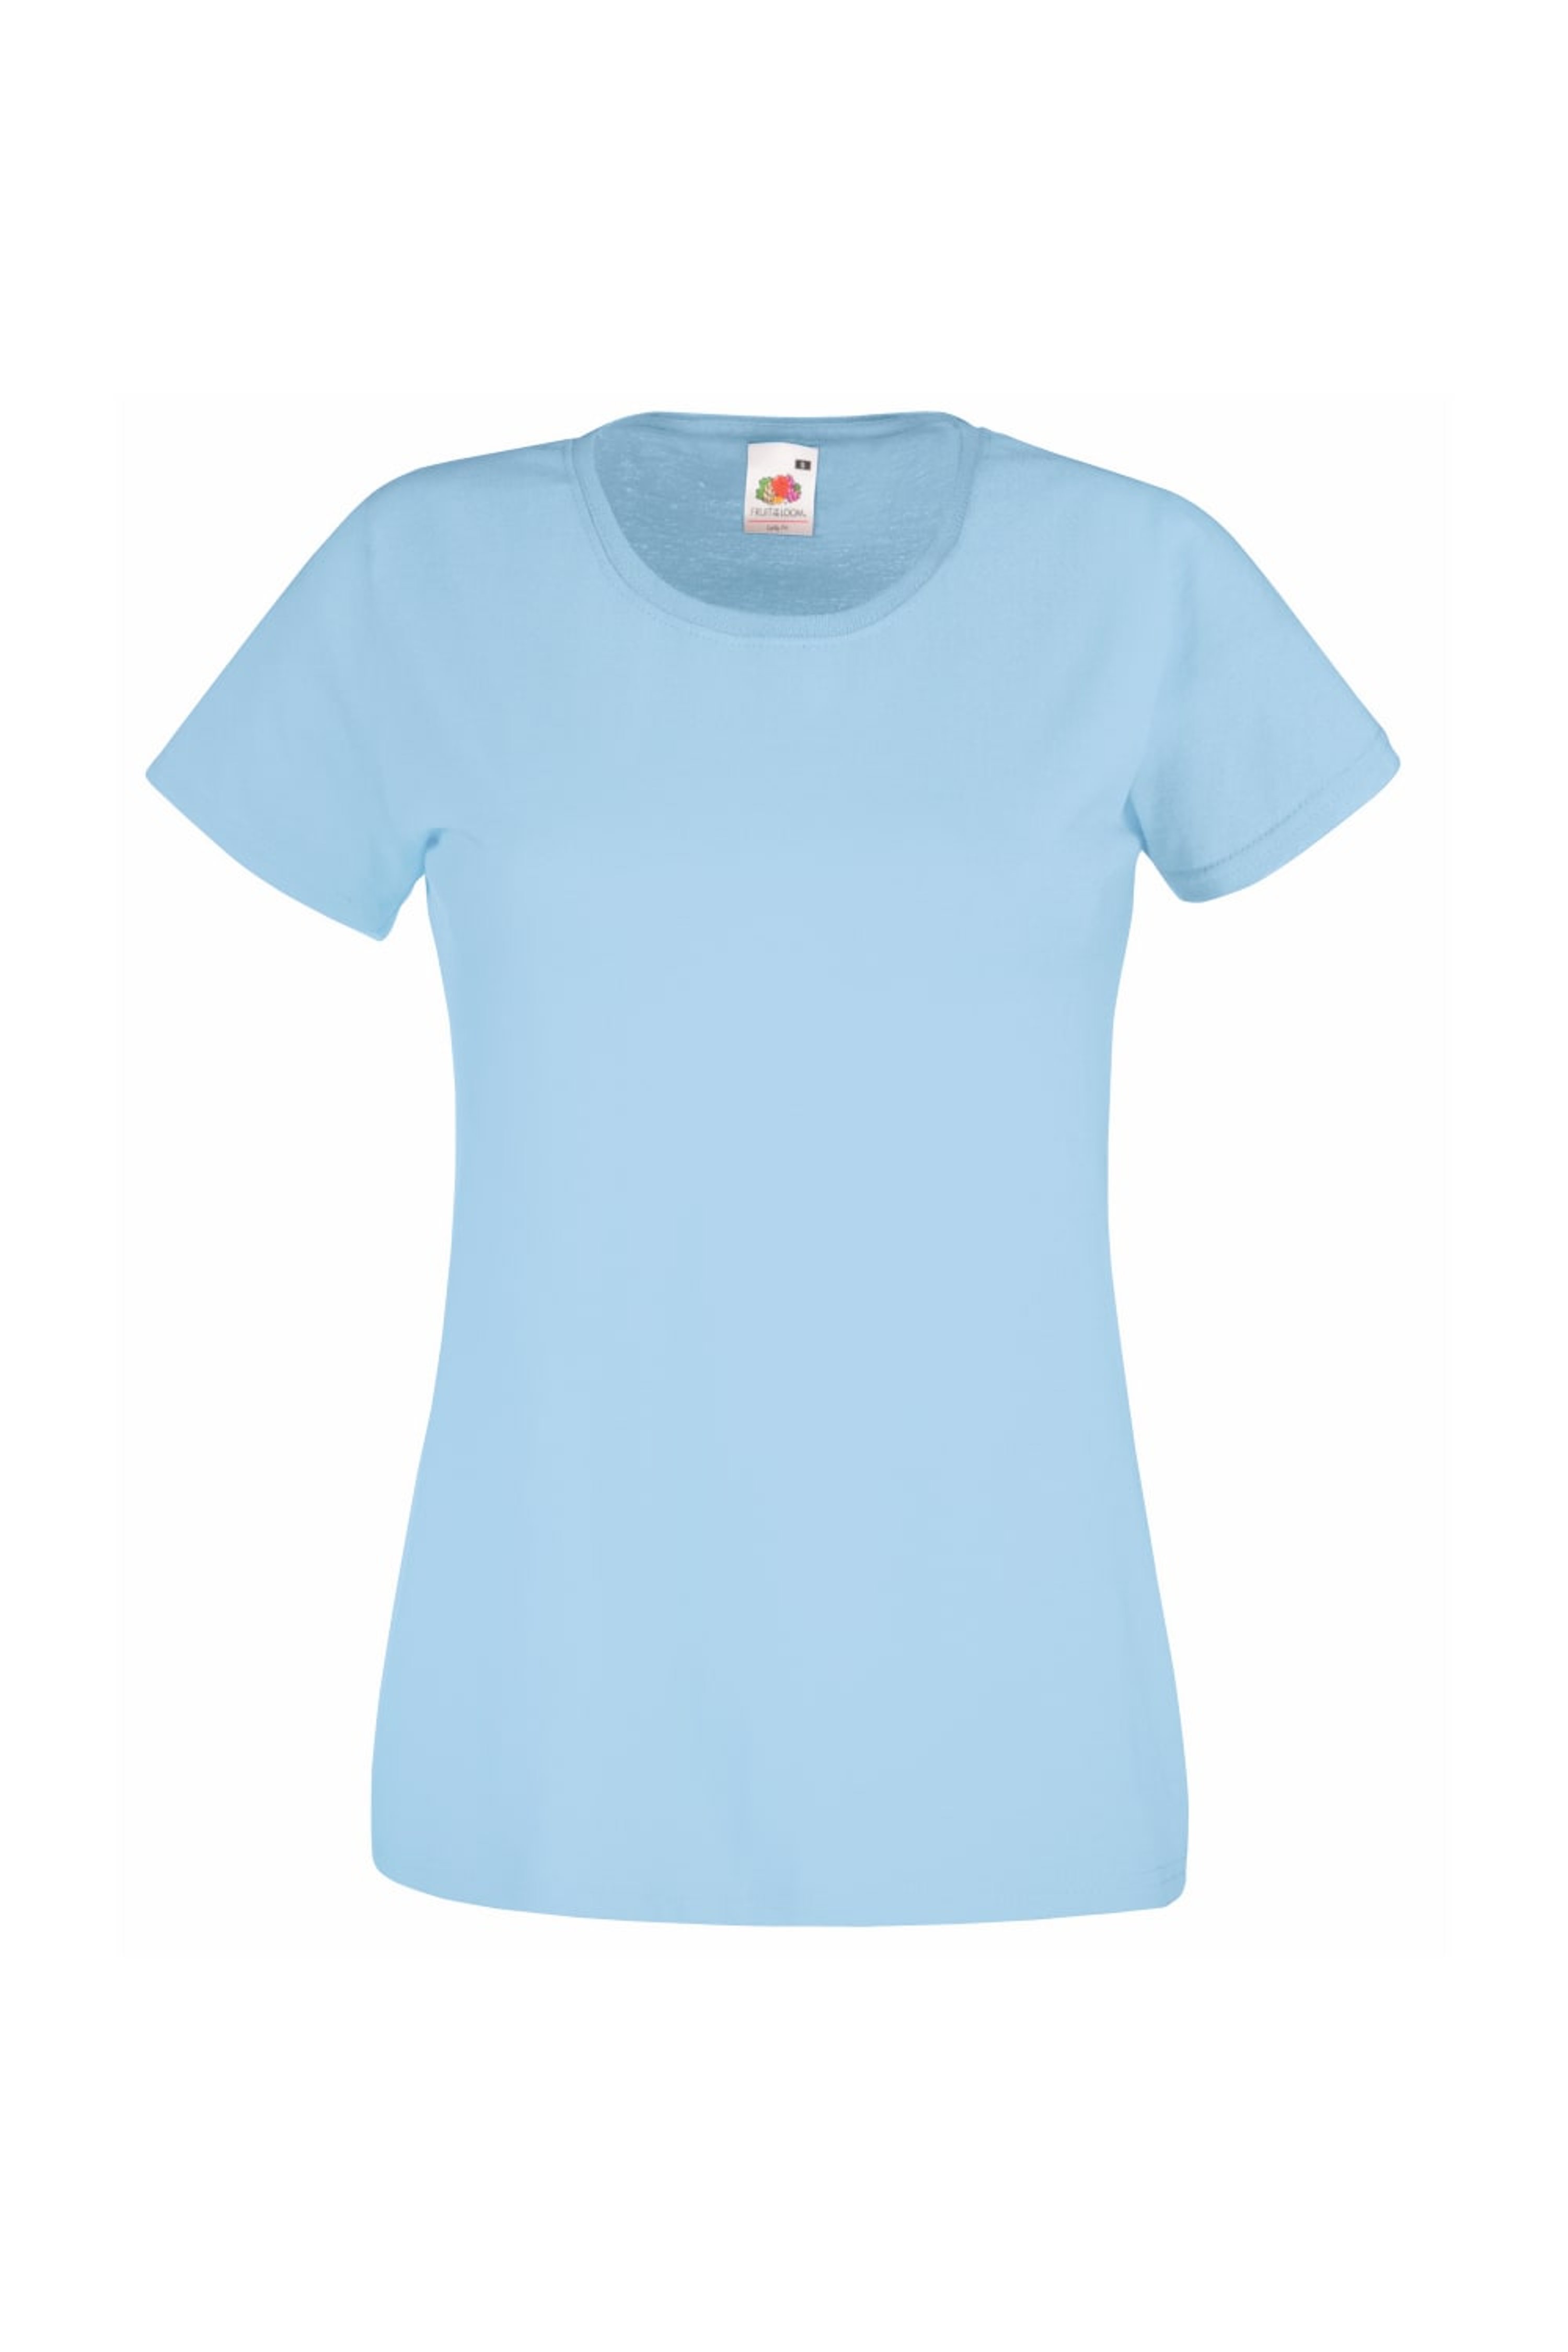 FRUIT OF THE LOOM FRUIT OF THE LOOM FRUIT OF THE LOOM LADIES/WOMENS LADY-FIT VALUEWEIGHT SHORT SLEEVE T-SHIRT (PACK (S